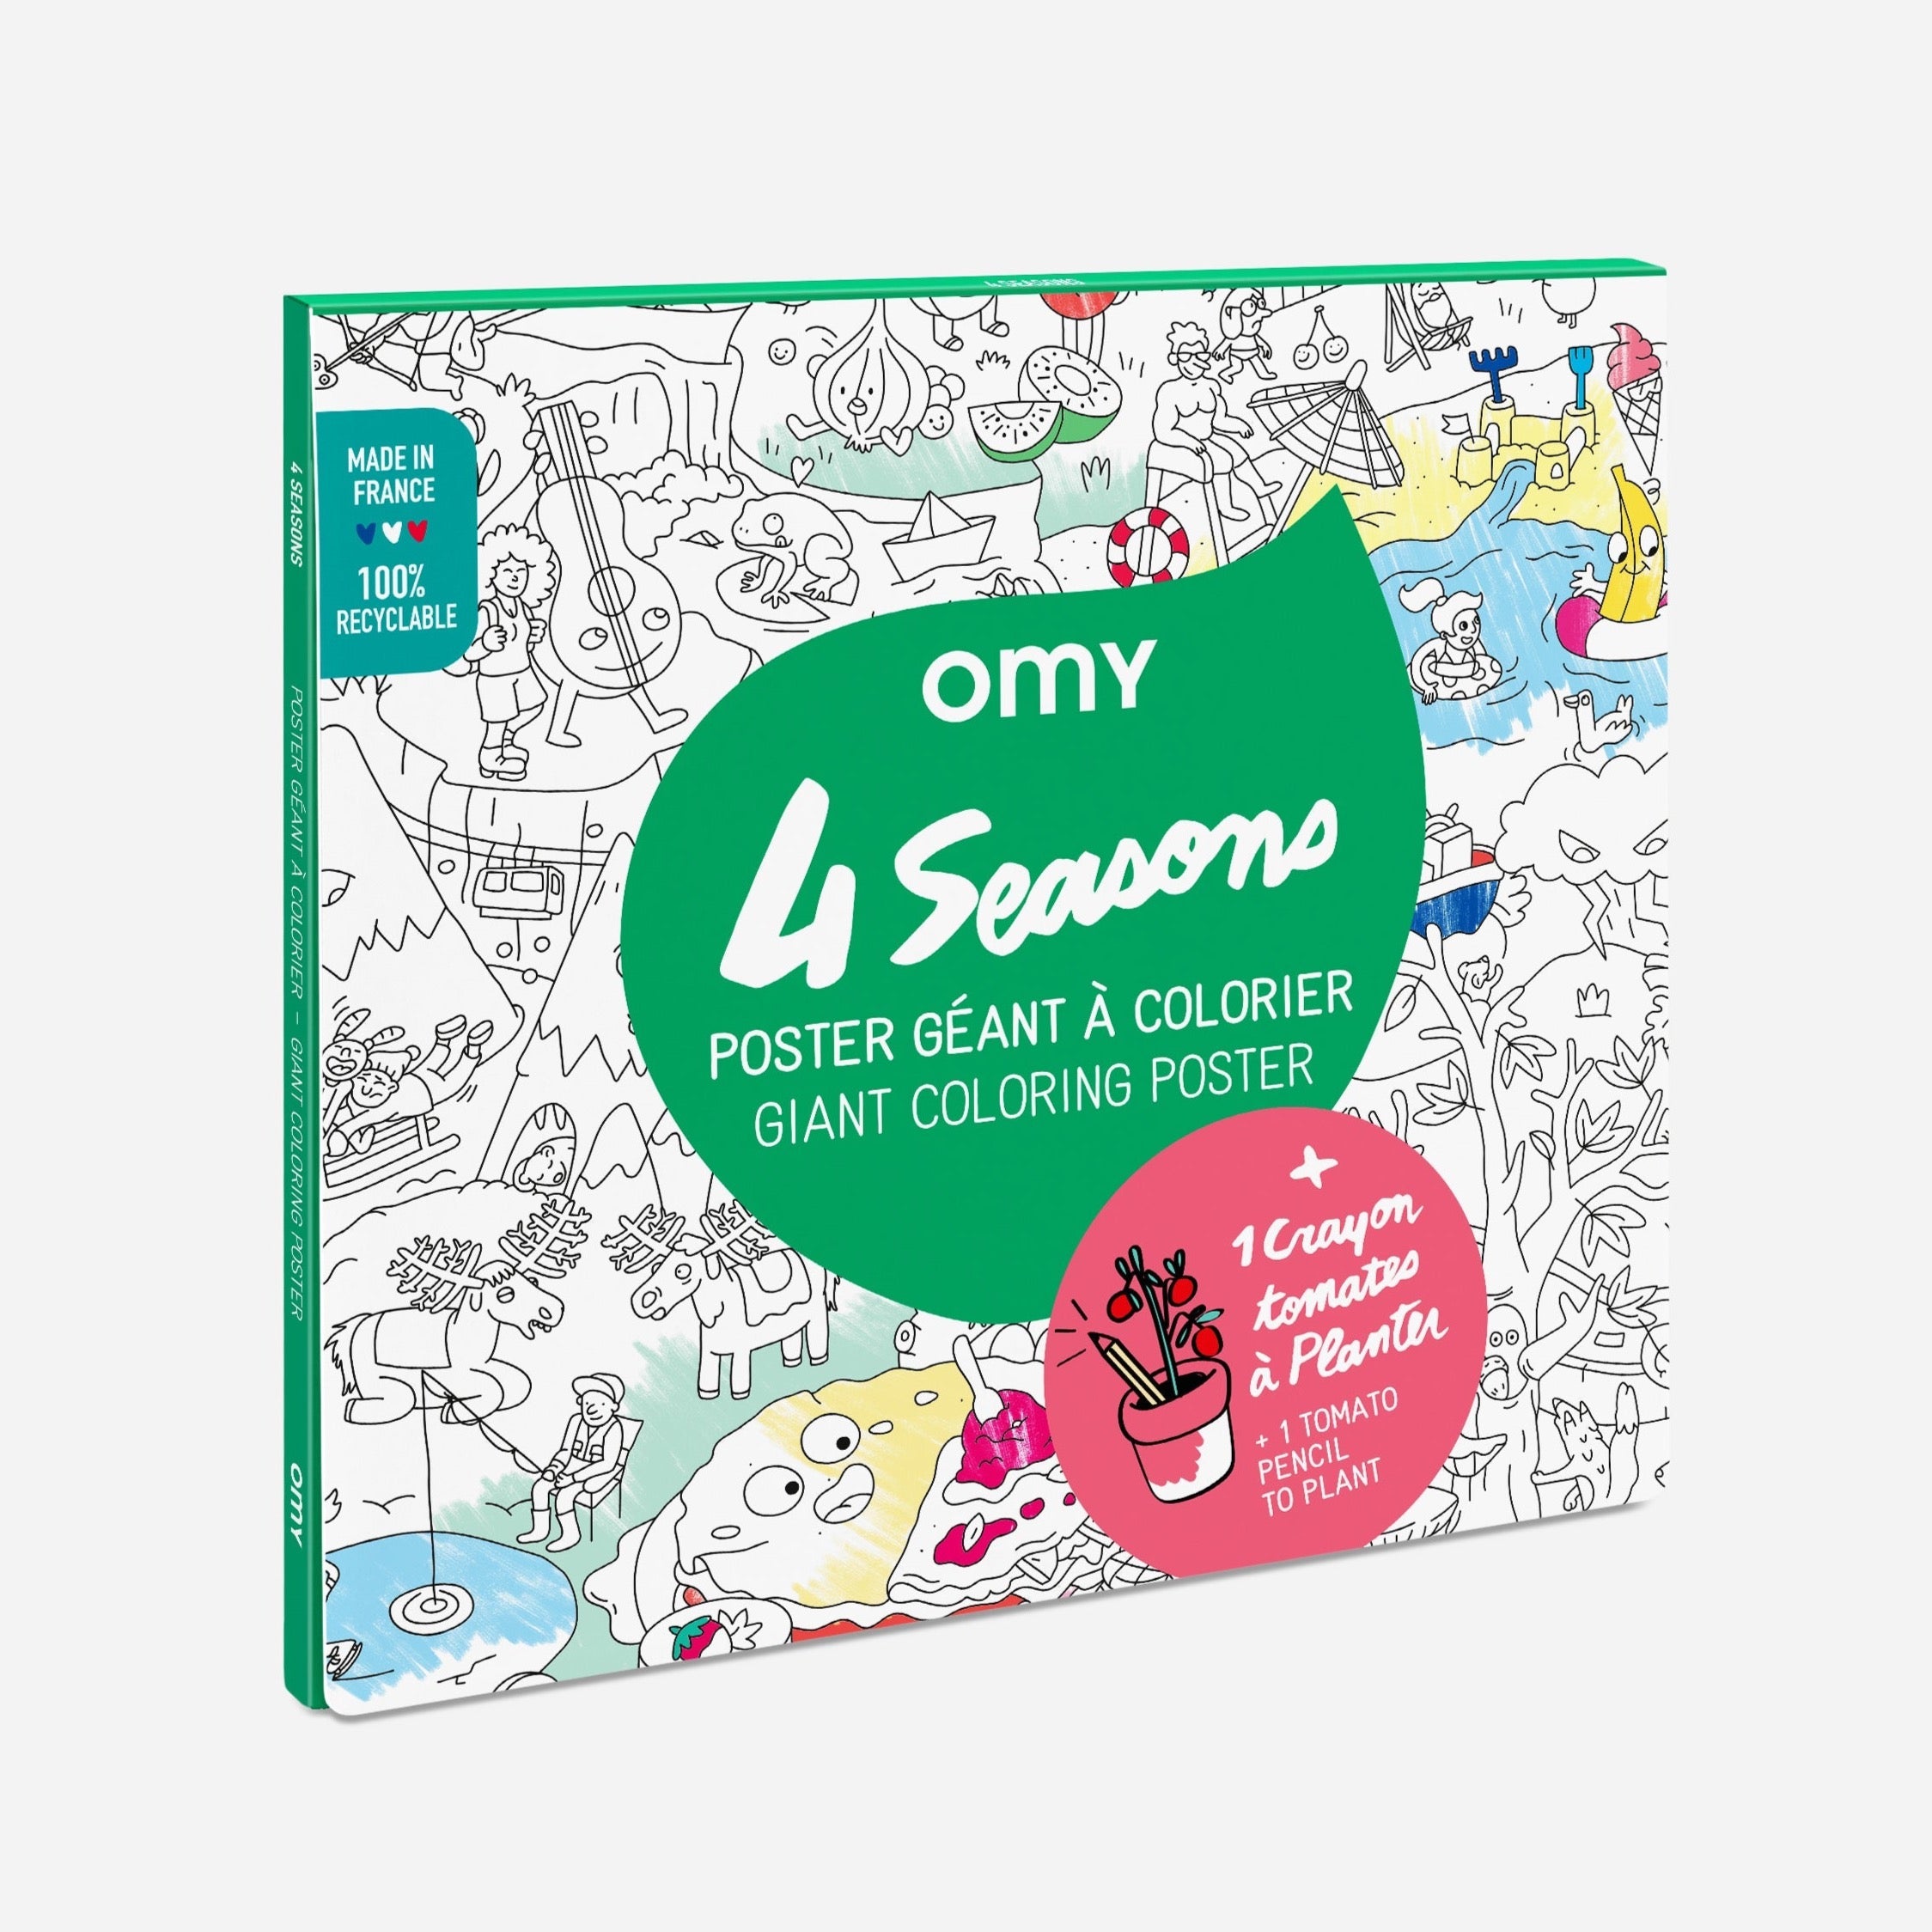 OMY Coloriage POSTER FUN PARK